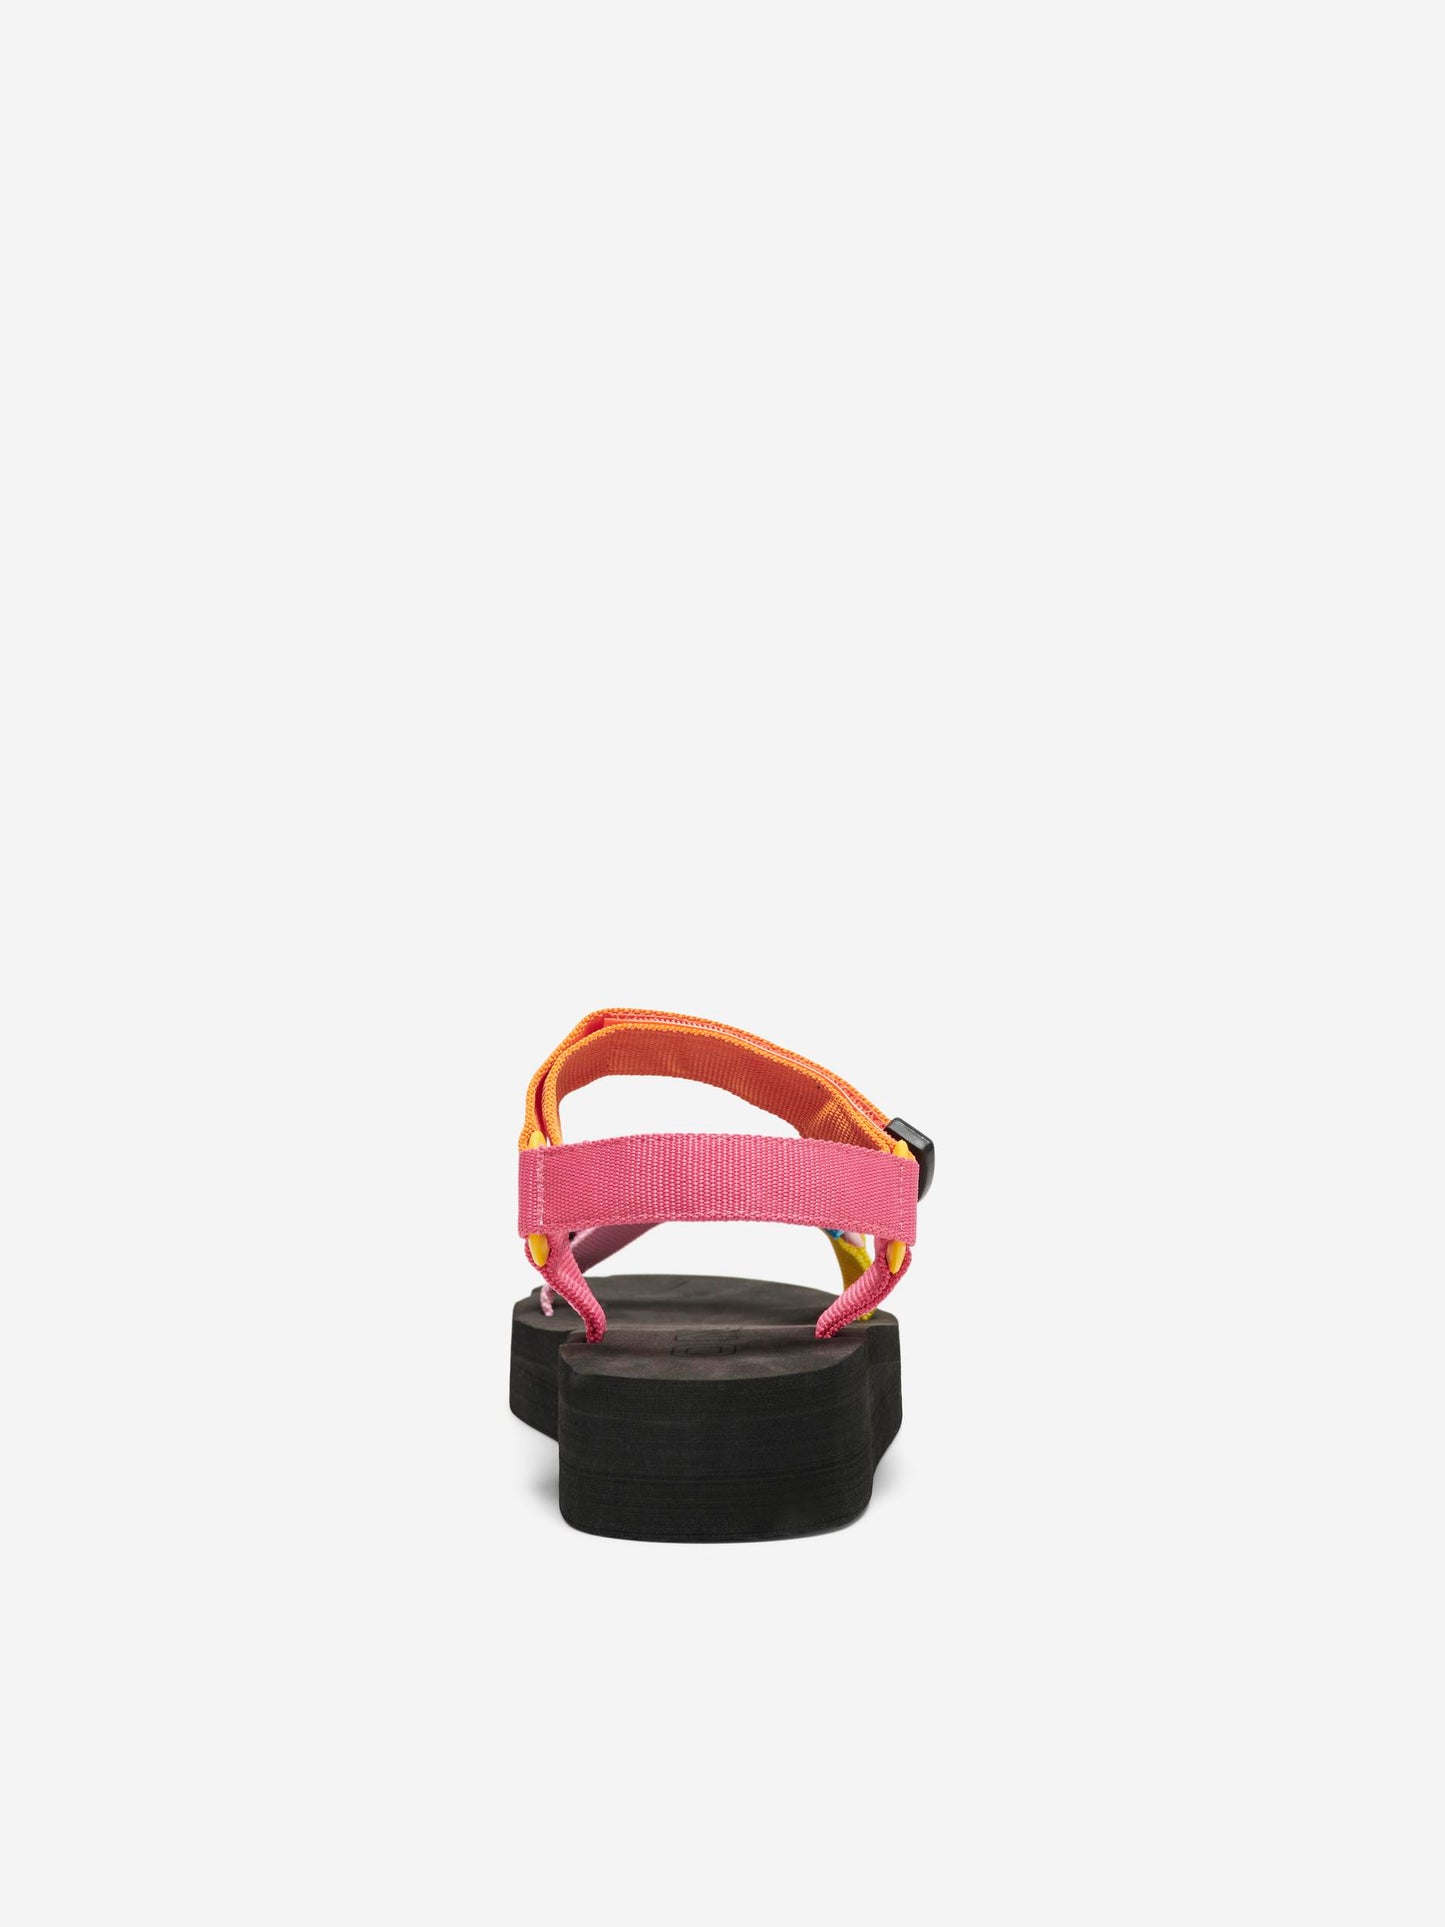 Only - Rainbow Strap Sandals